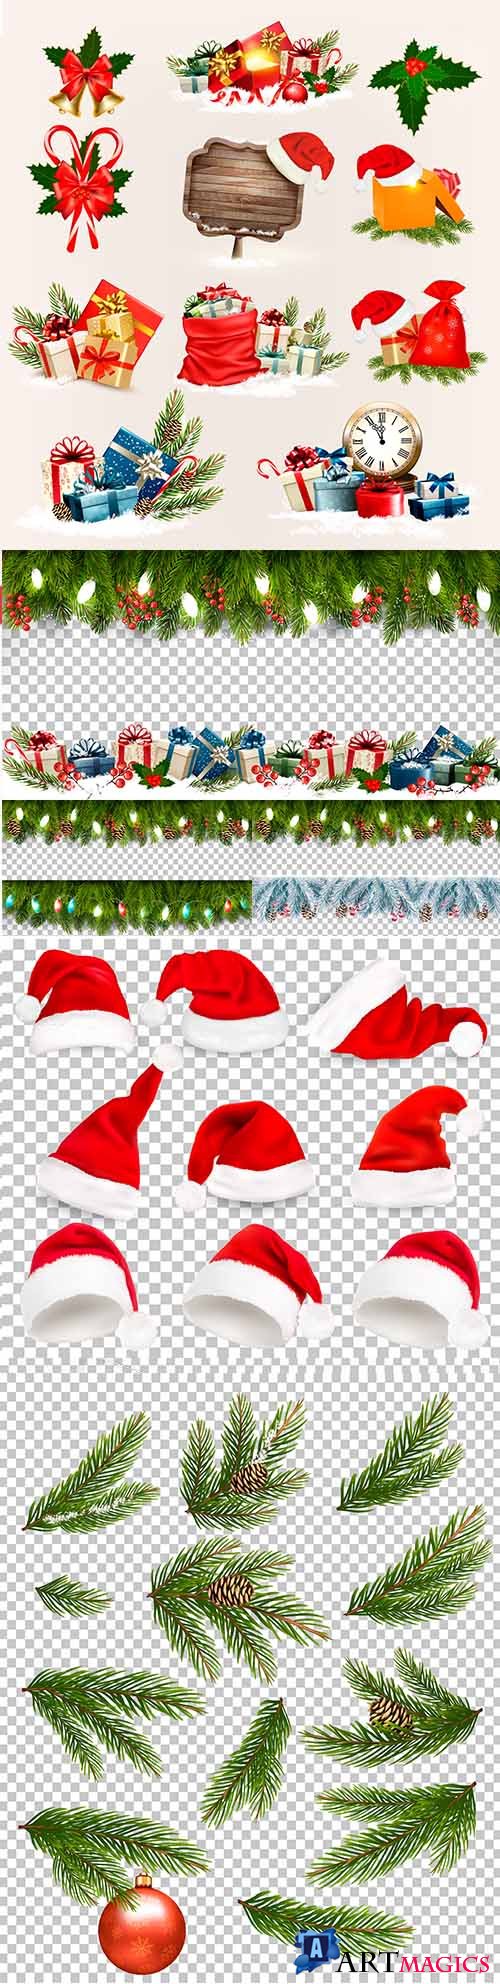 Vector set of Christmas icons and objects, boards with branches of tree